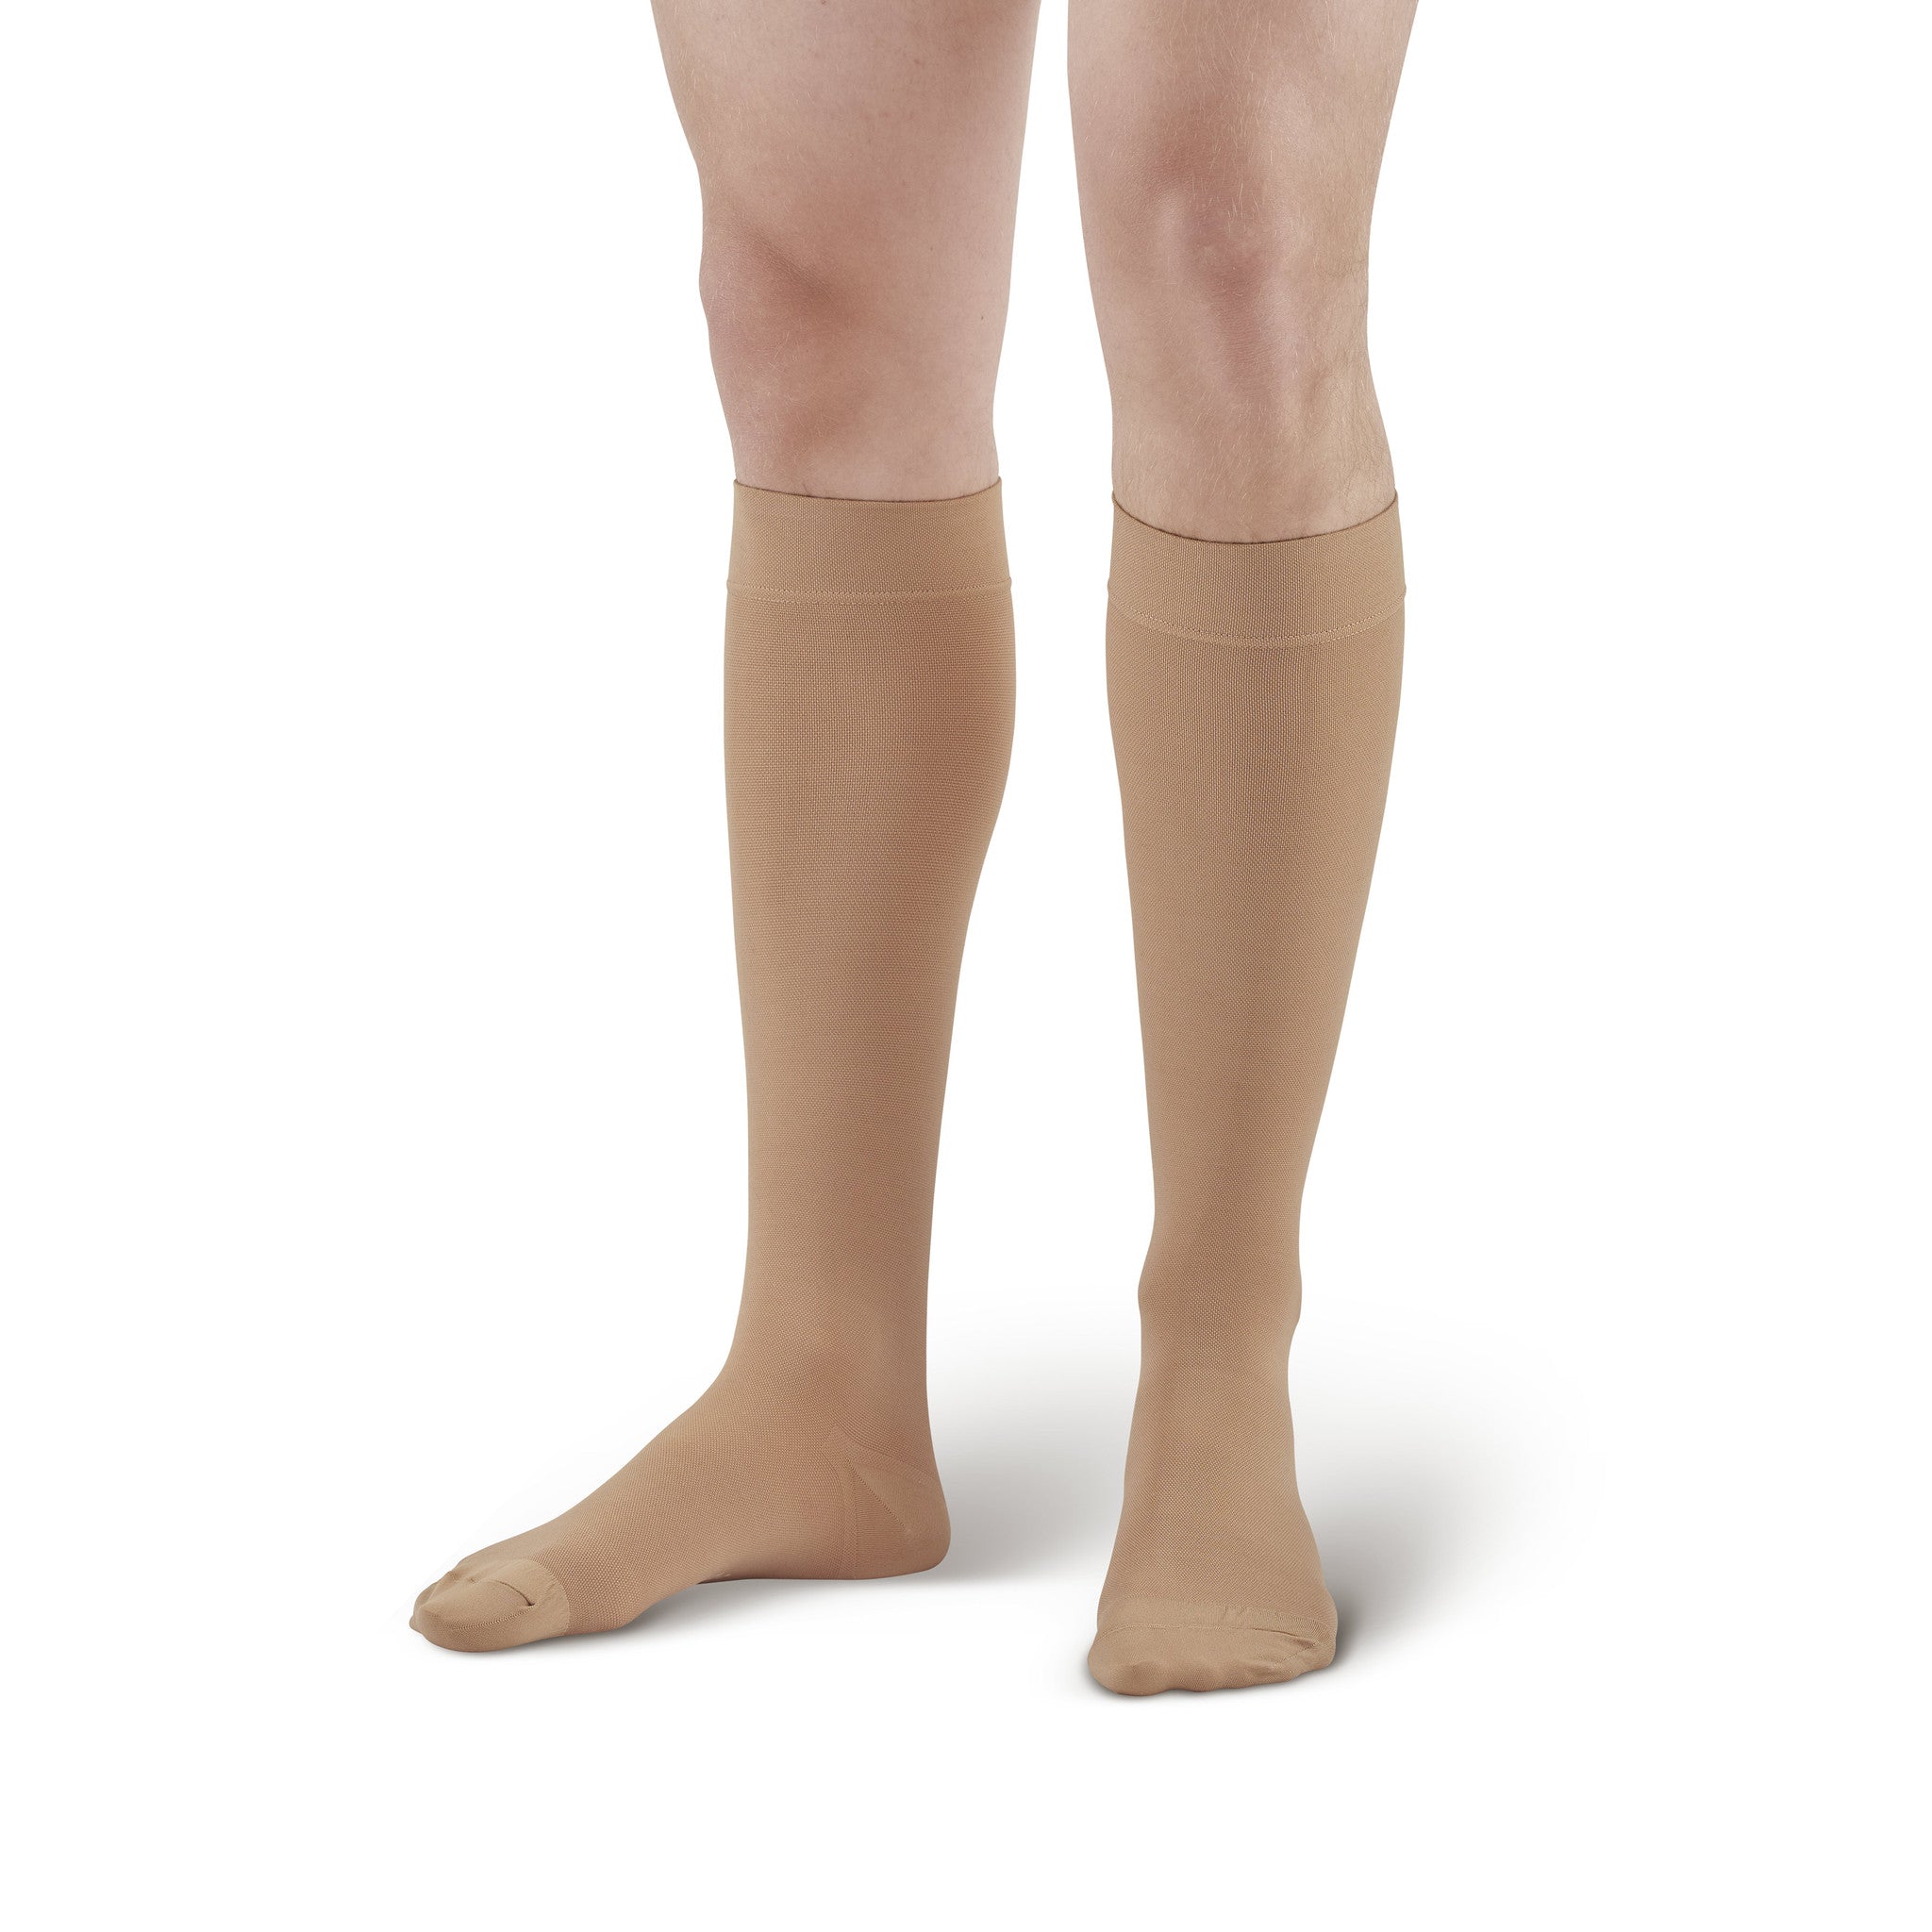 AW Style 300 Medical Support Closed Toe Knee Highs - 30-40 mmHg | Ames ...